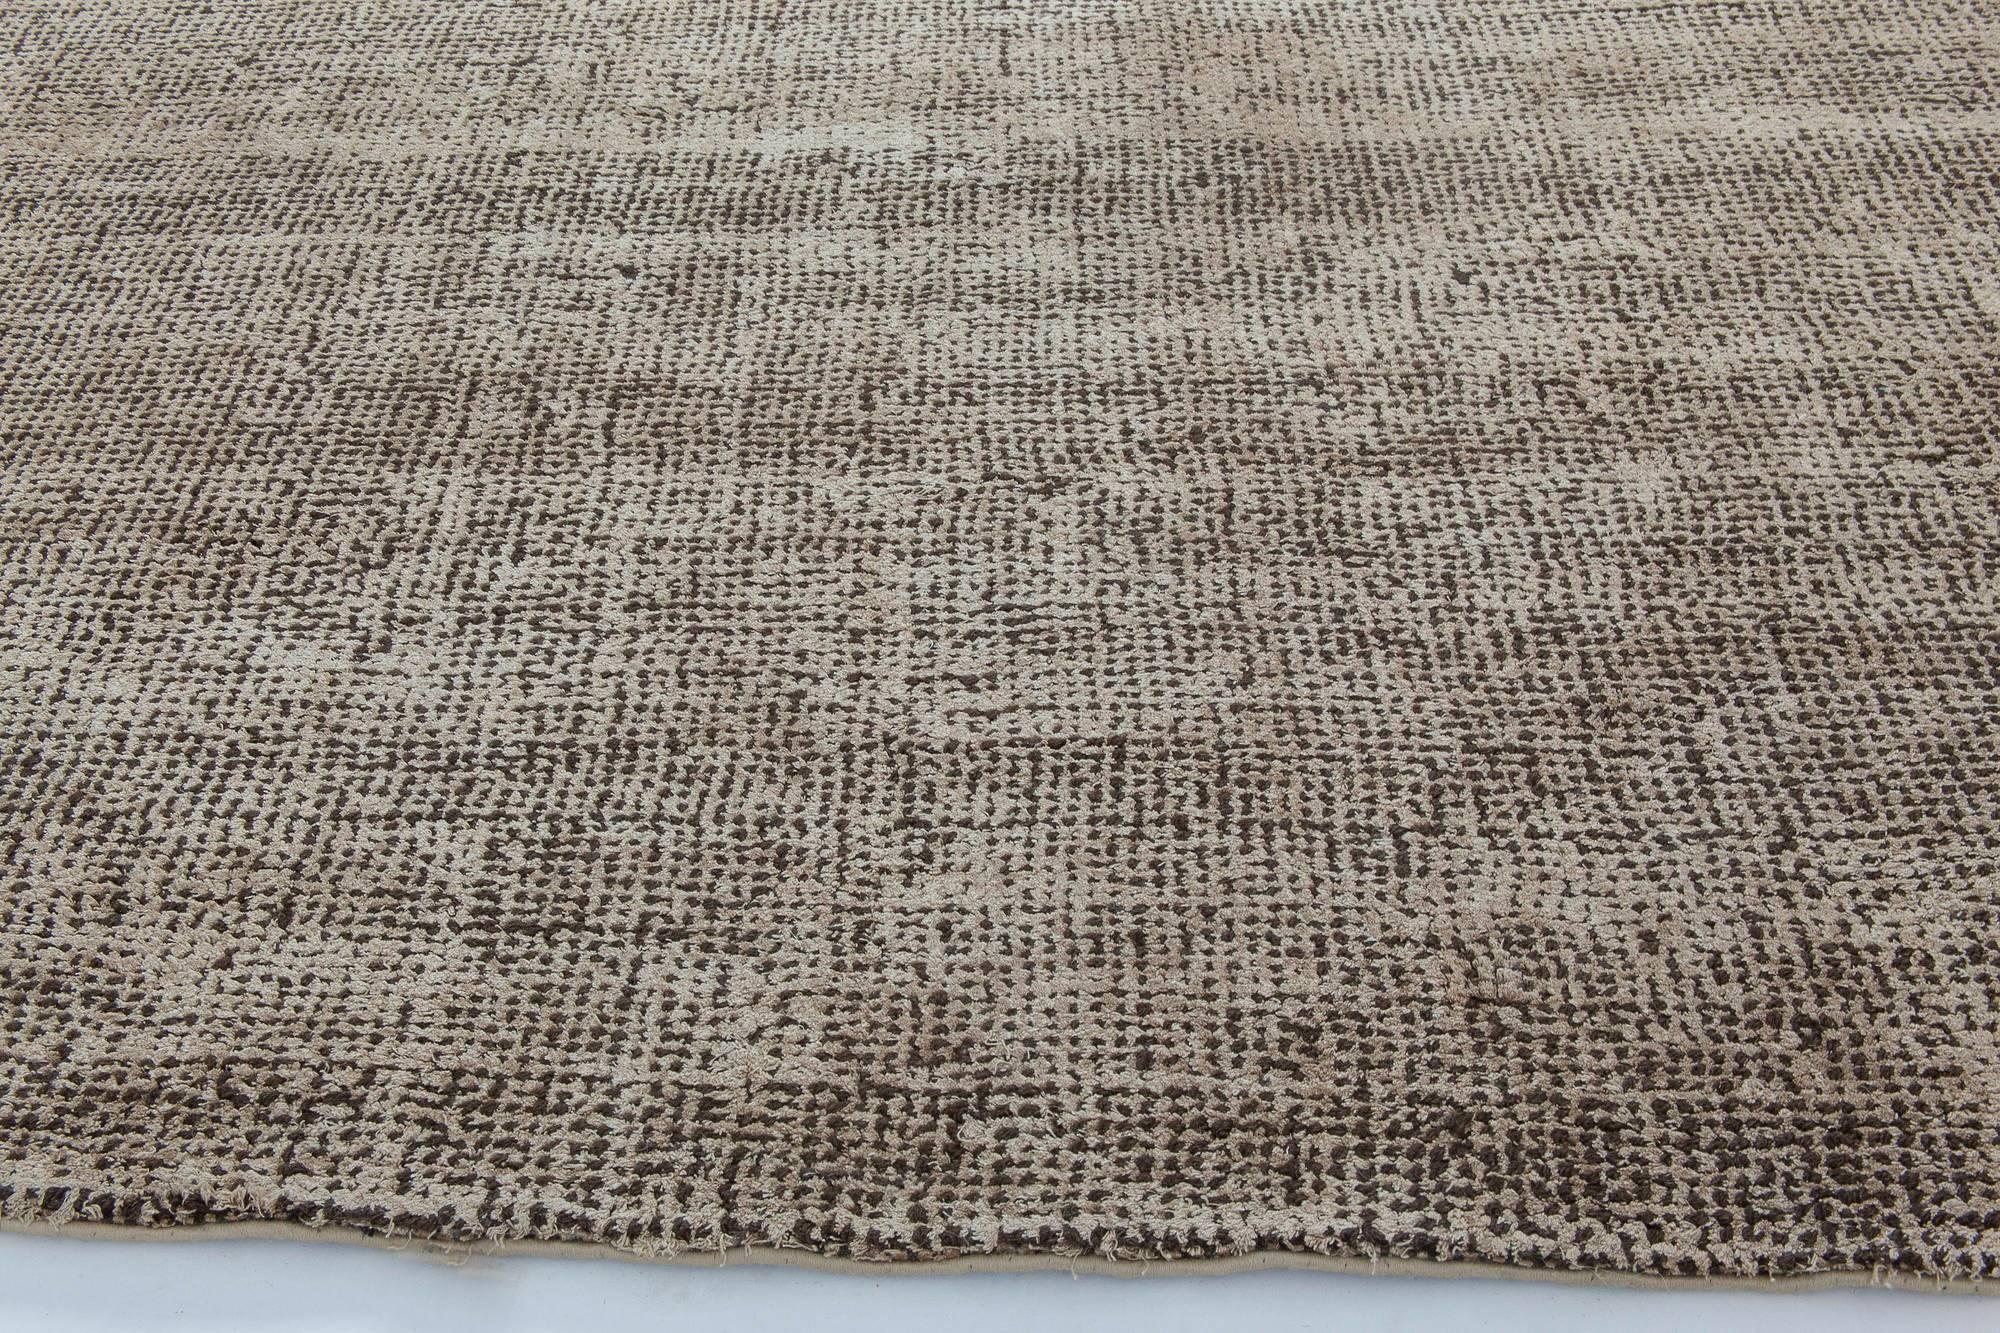 Brown Contemporary rug
Size: 5'8